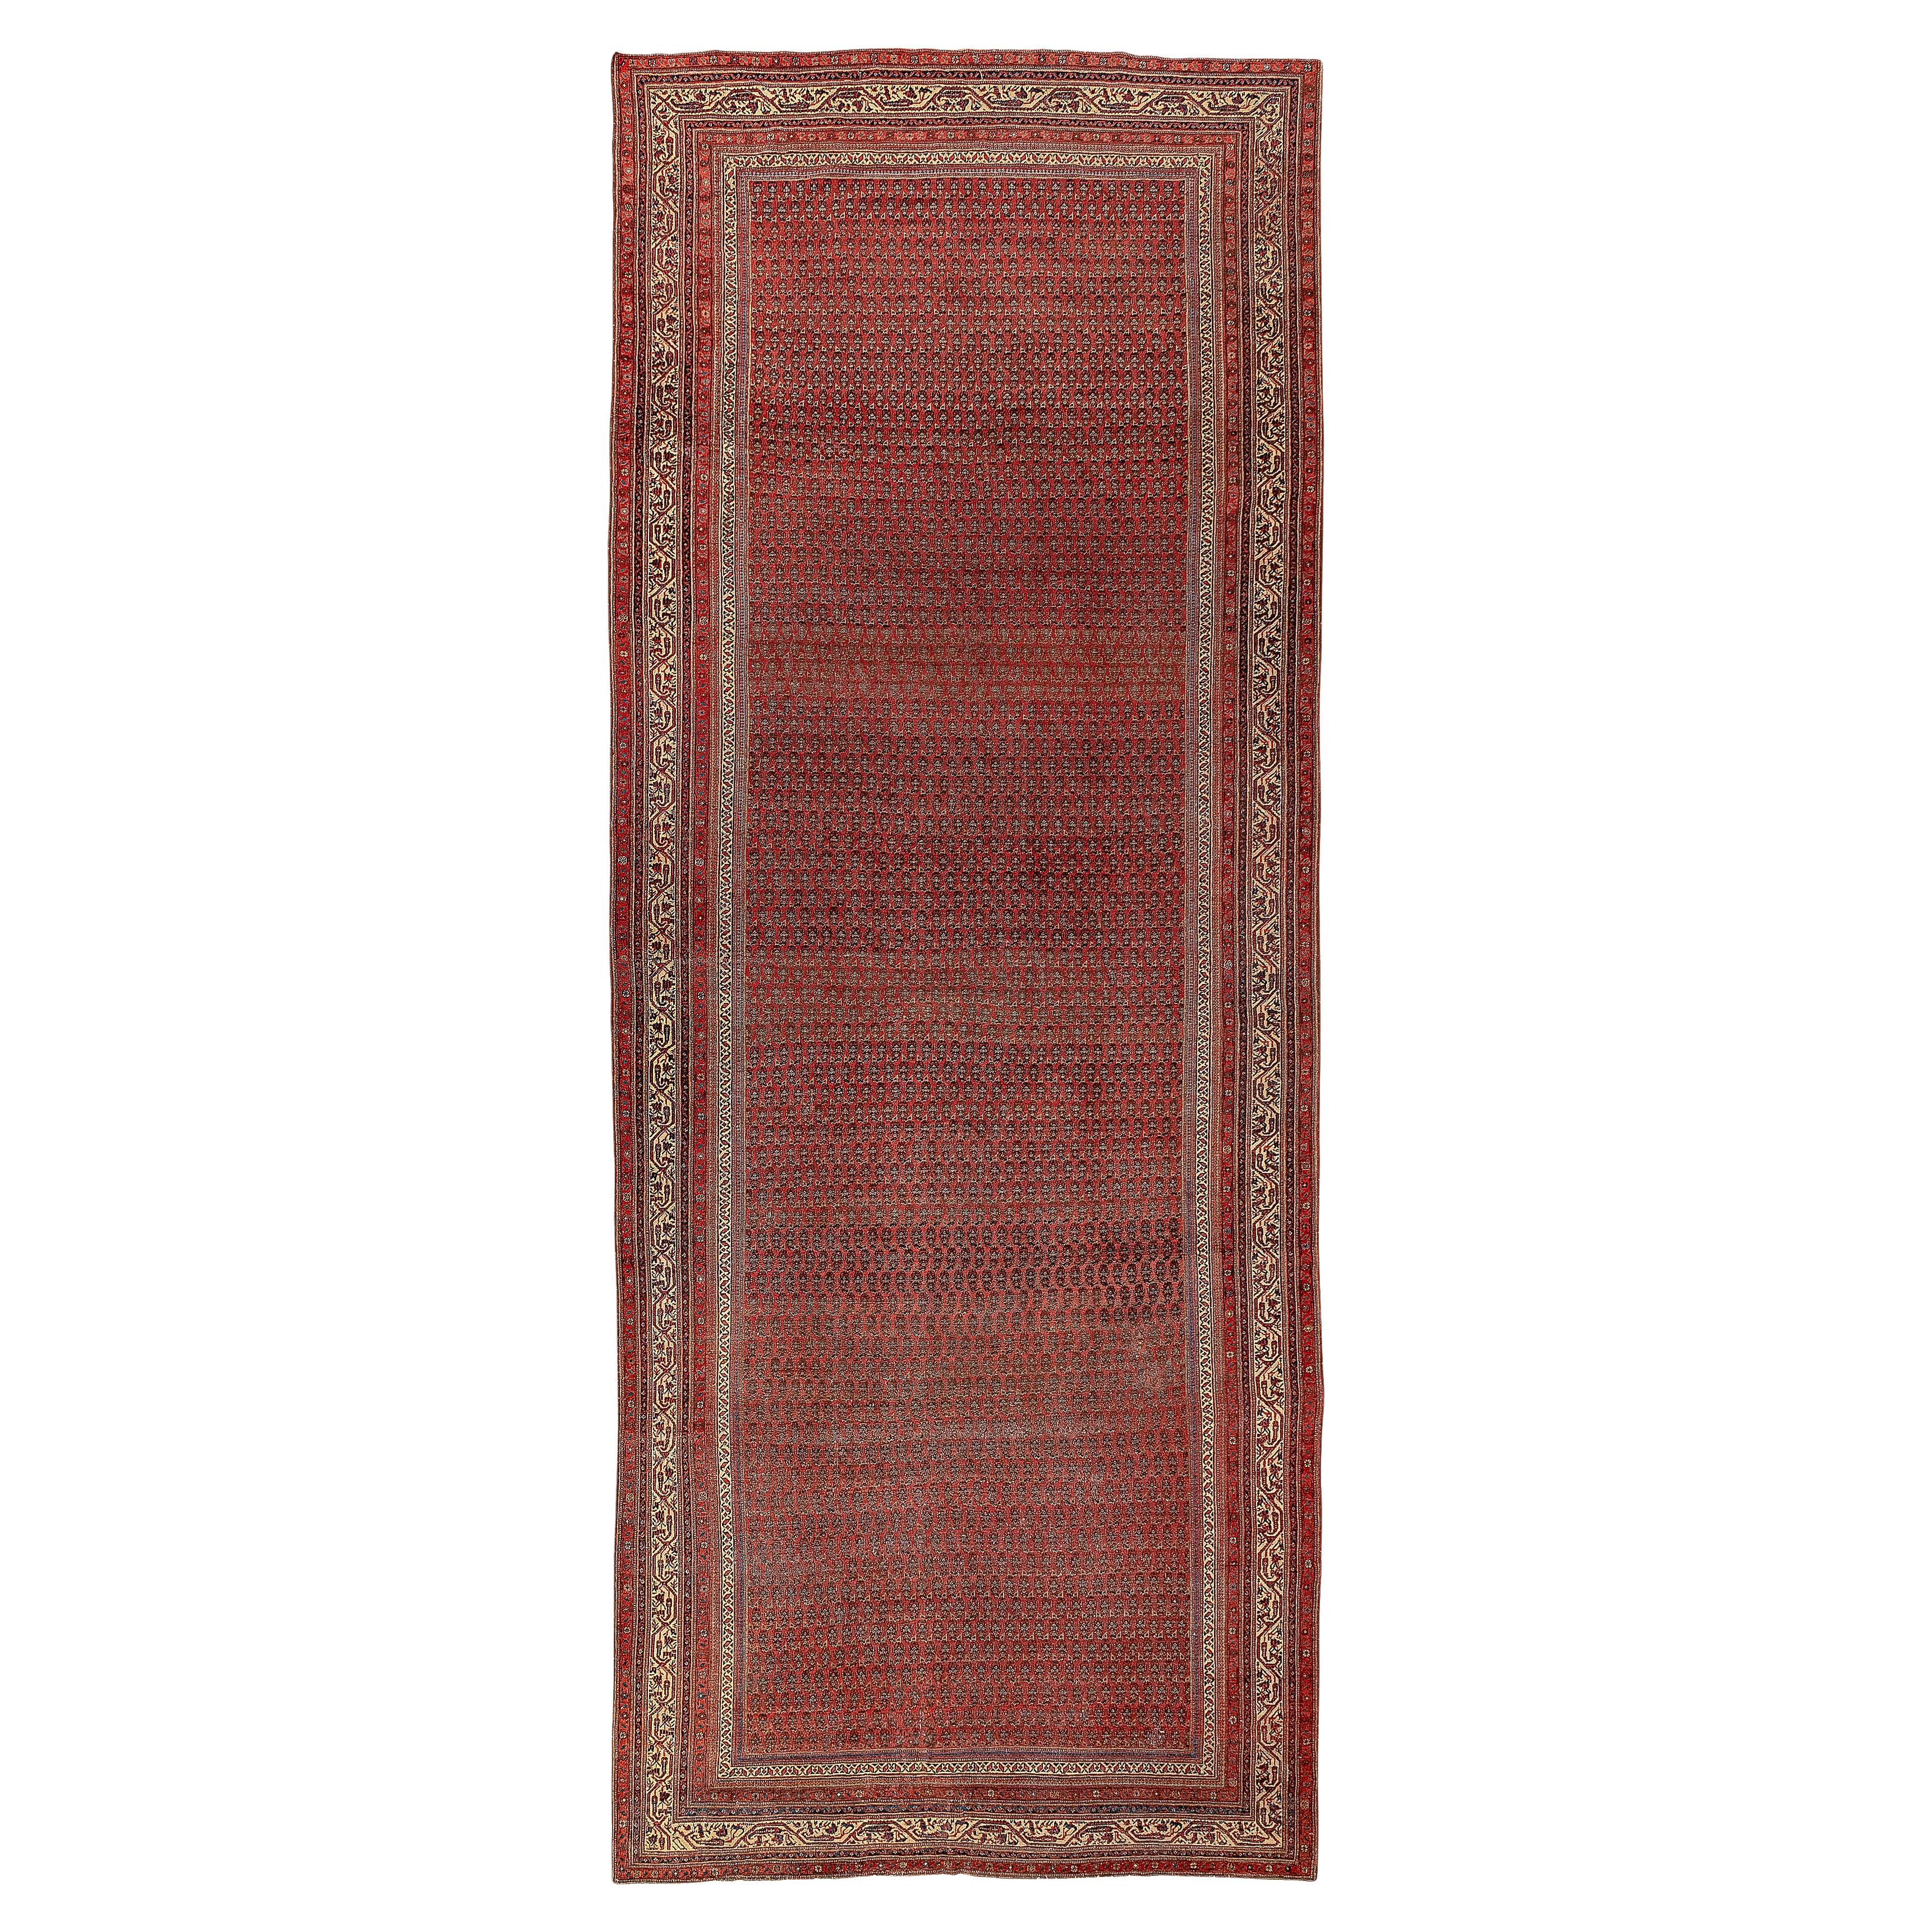 Antique Persia Seraband Rug Runner Galrery  For Sale